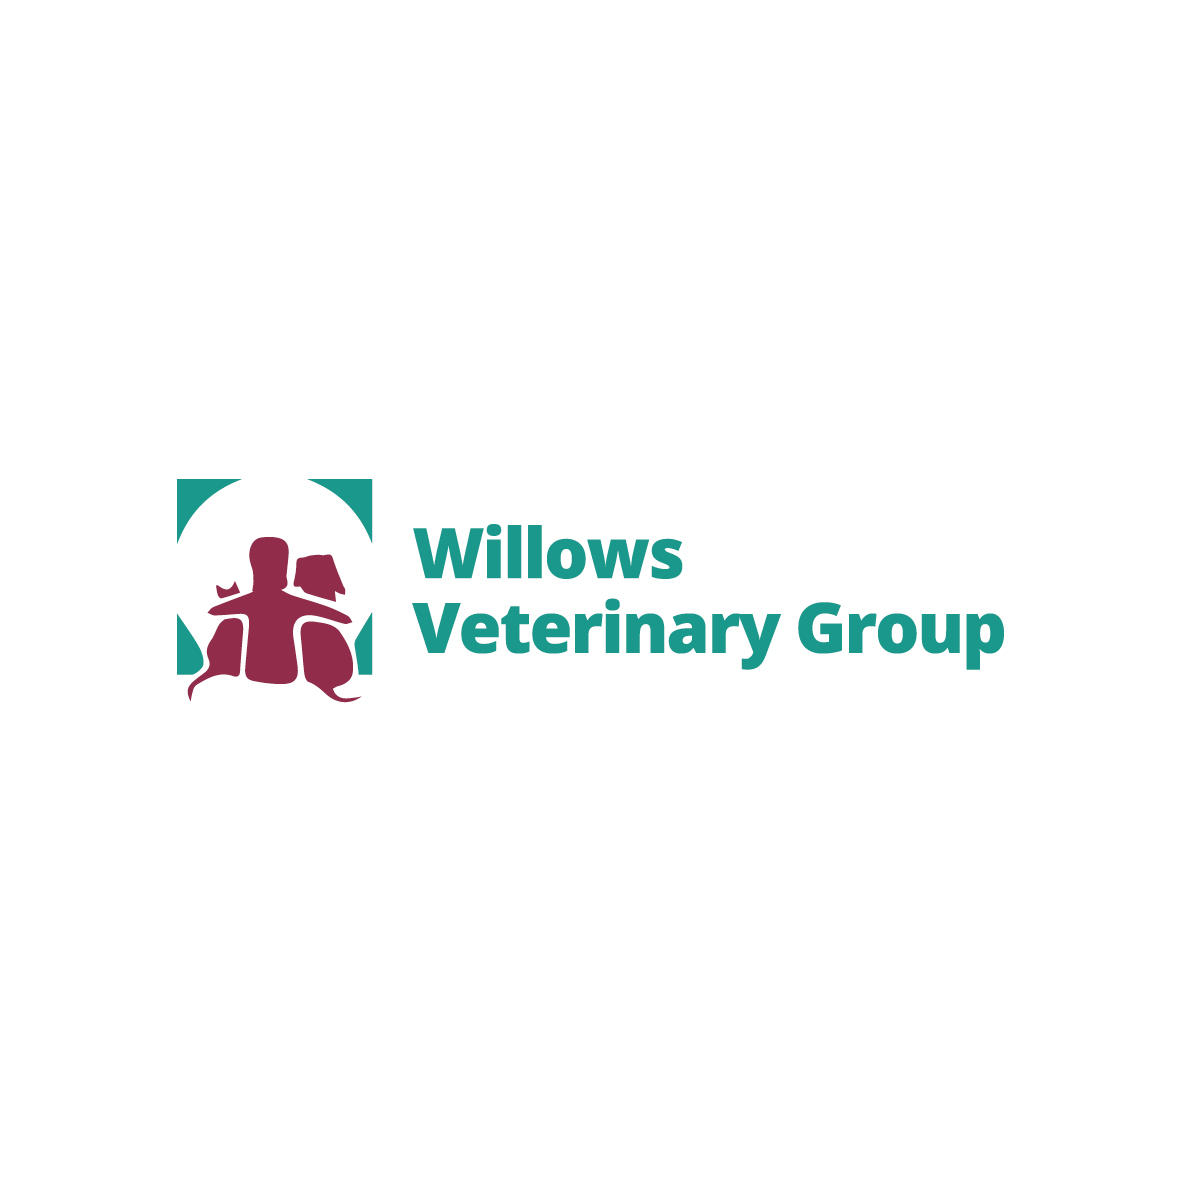 Willows Veterinary Group - Willows Veterinary Hospital - Northwich, Cheshire CW8 1LP - 01606 723202 | ShowMeLocal.com